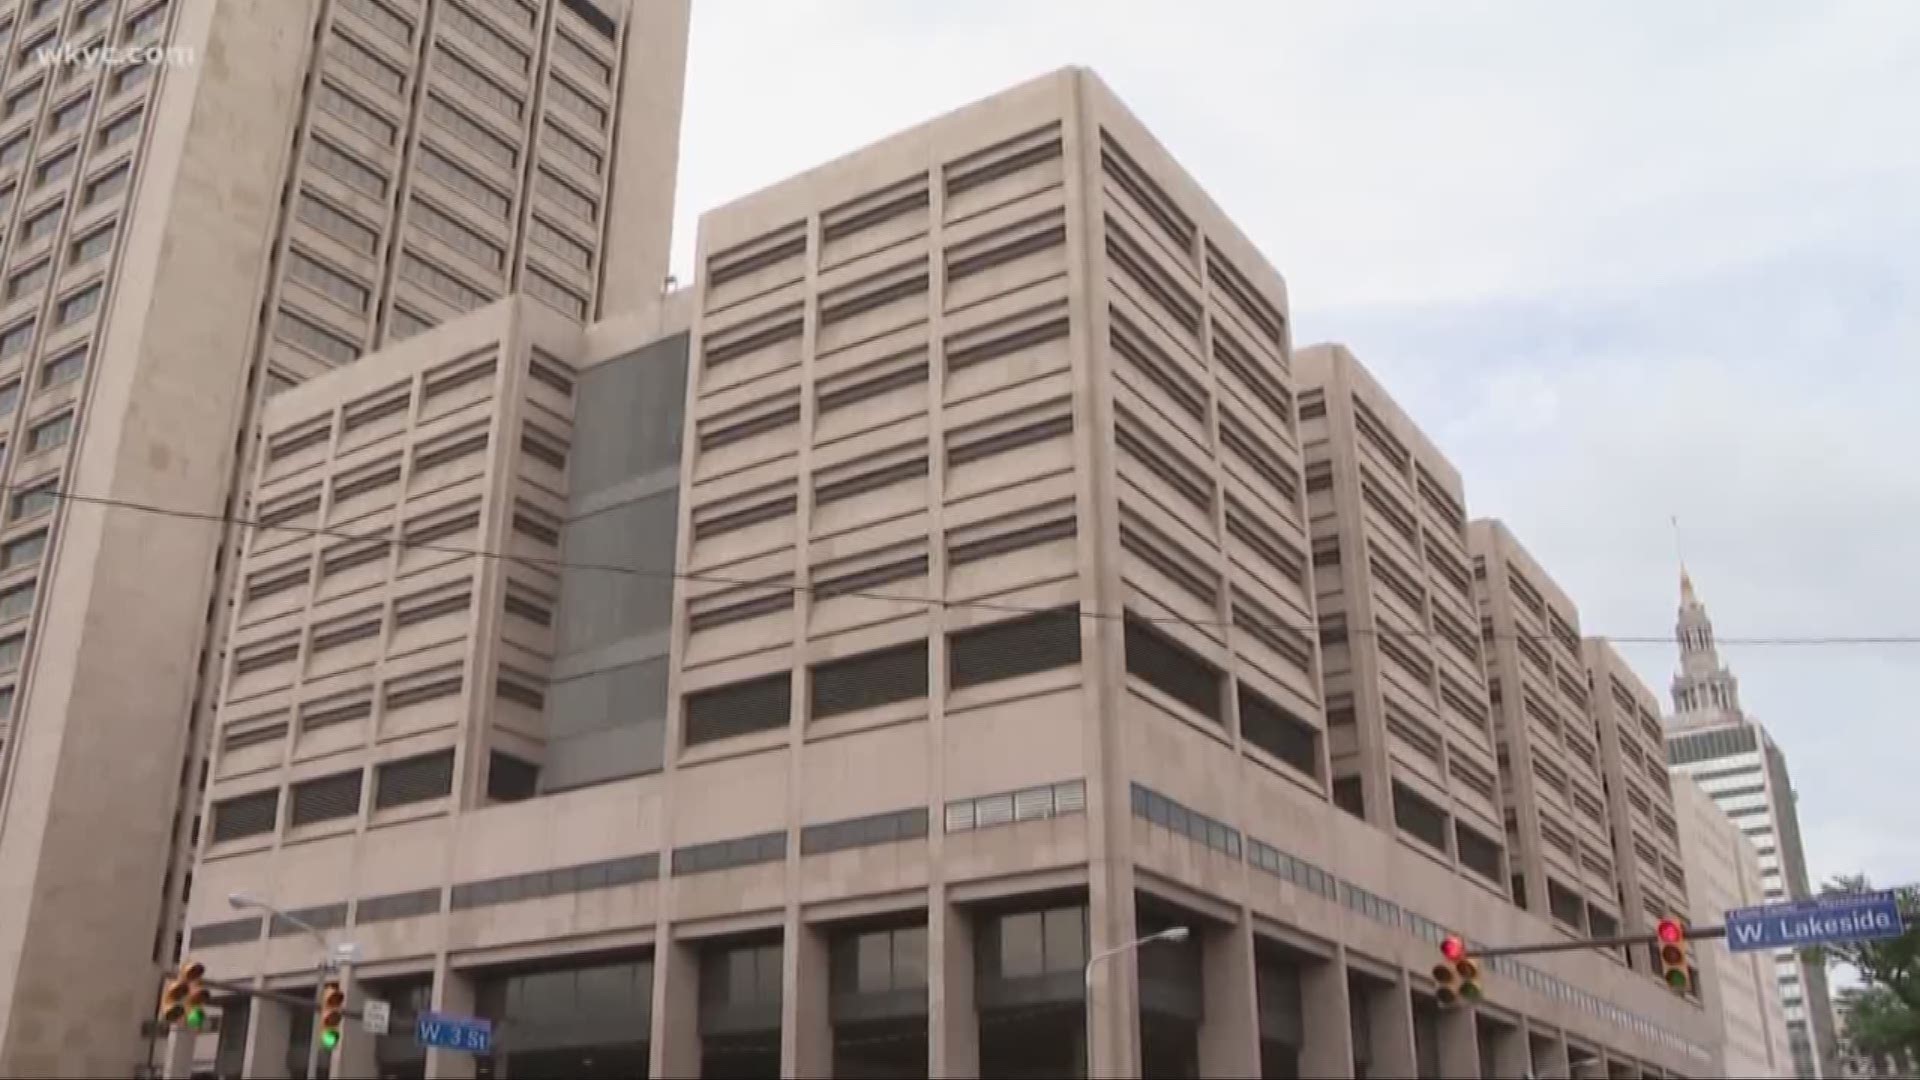 20 inmates file lawsuit against Cuyahoga jail, conditons